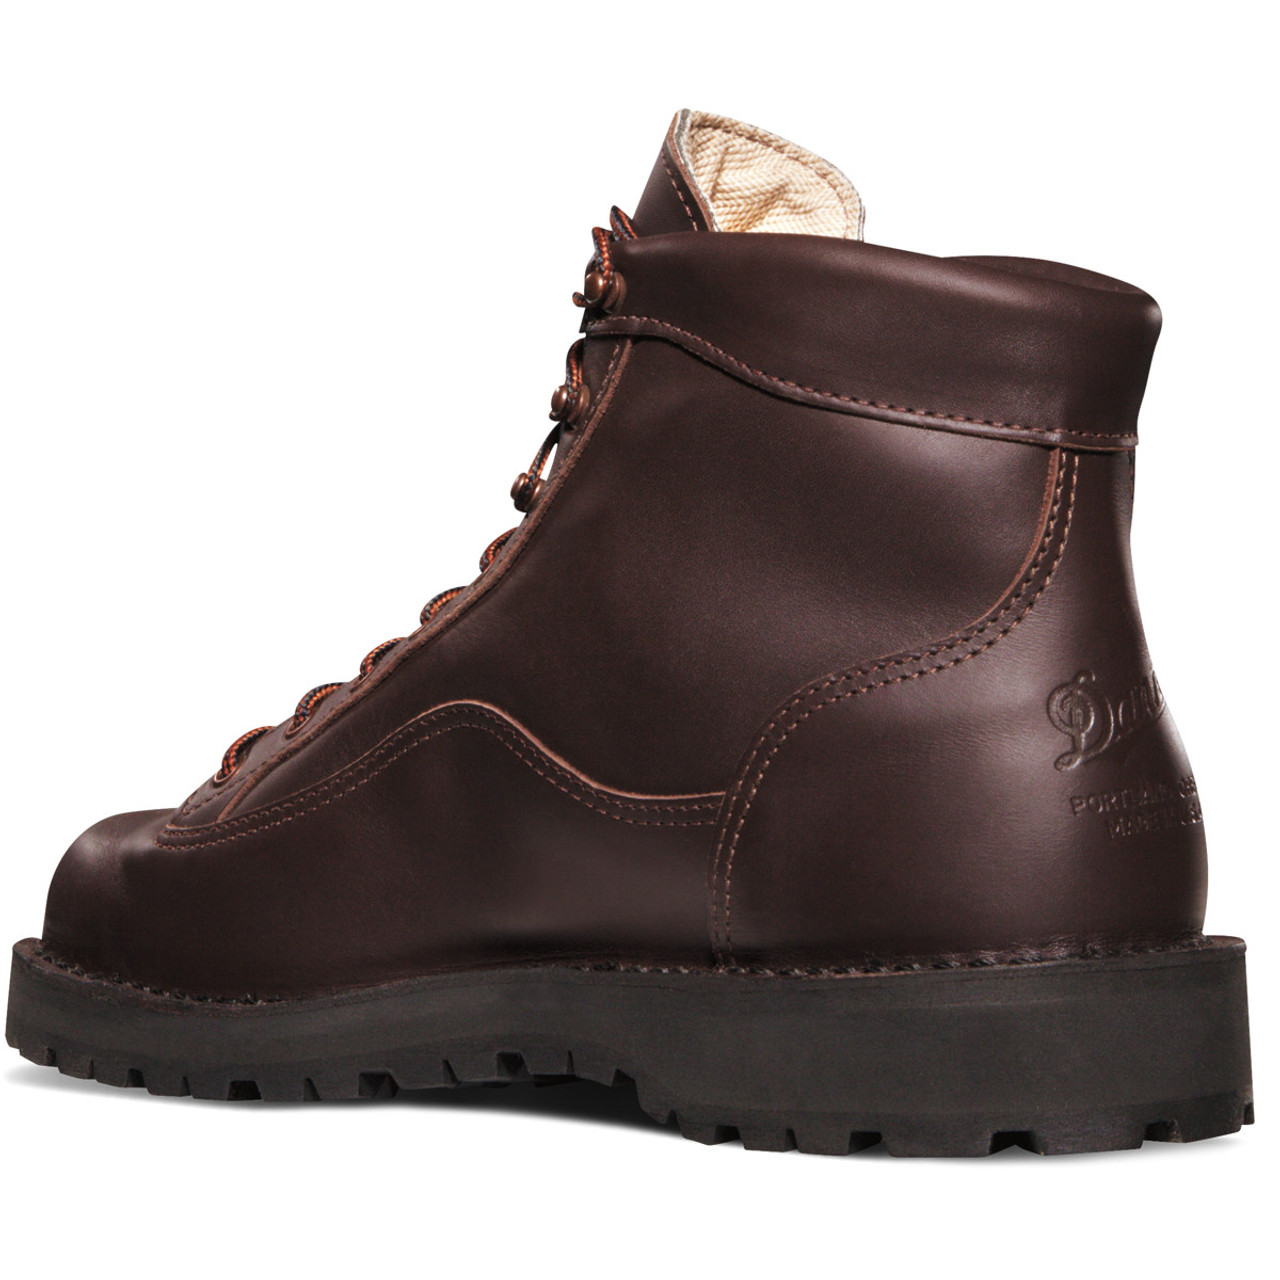 WOMEN'S EXPLORER ALL-LEATHER BROWN